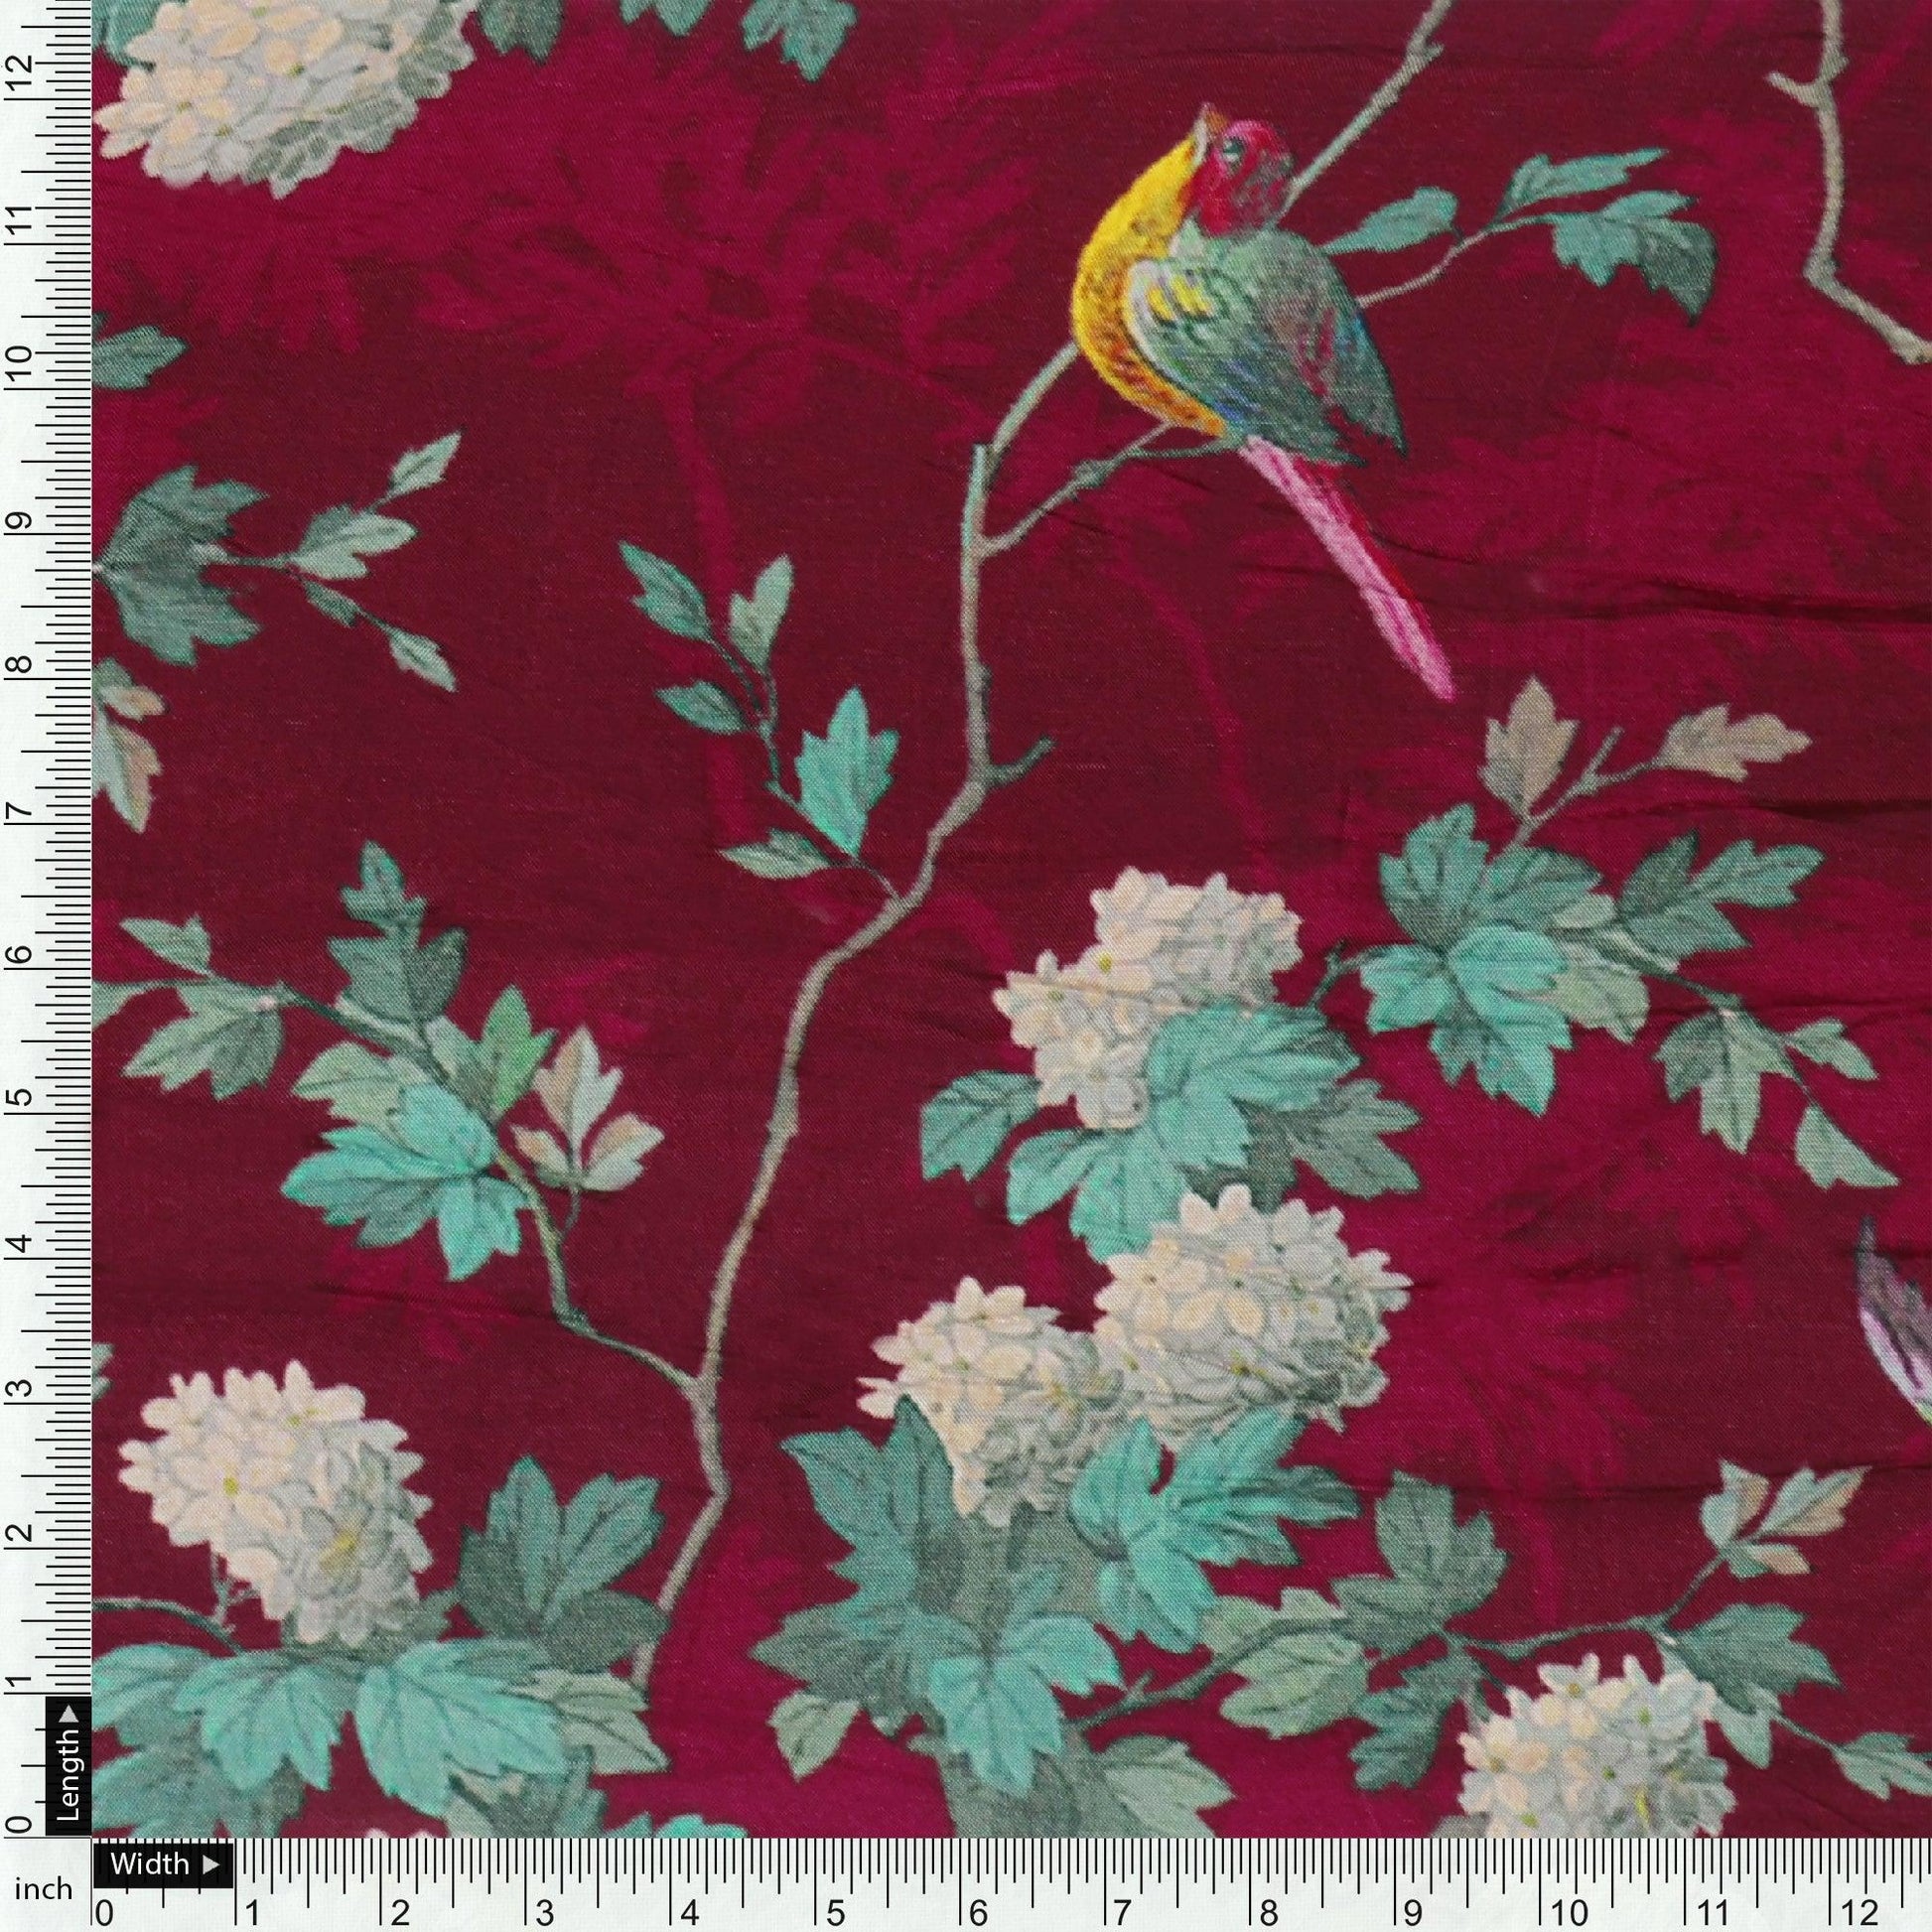 Viscose Upada Silk Digital Printed Fabric with Floral Patterns in Maroon Color - FAB VOGUE Studio®